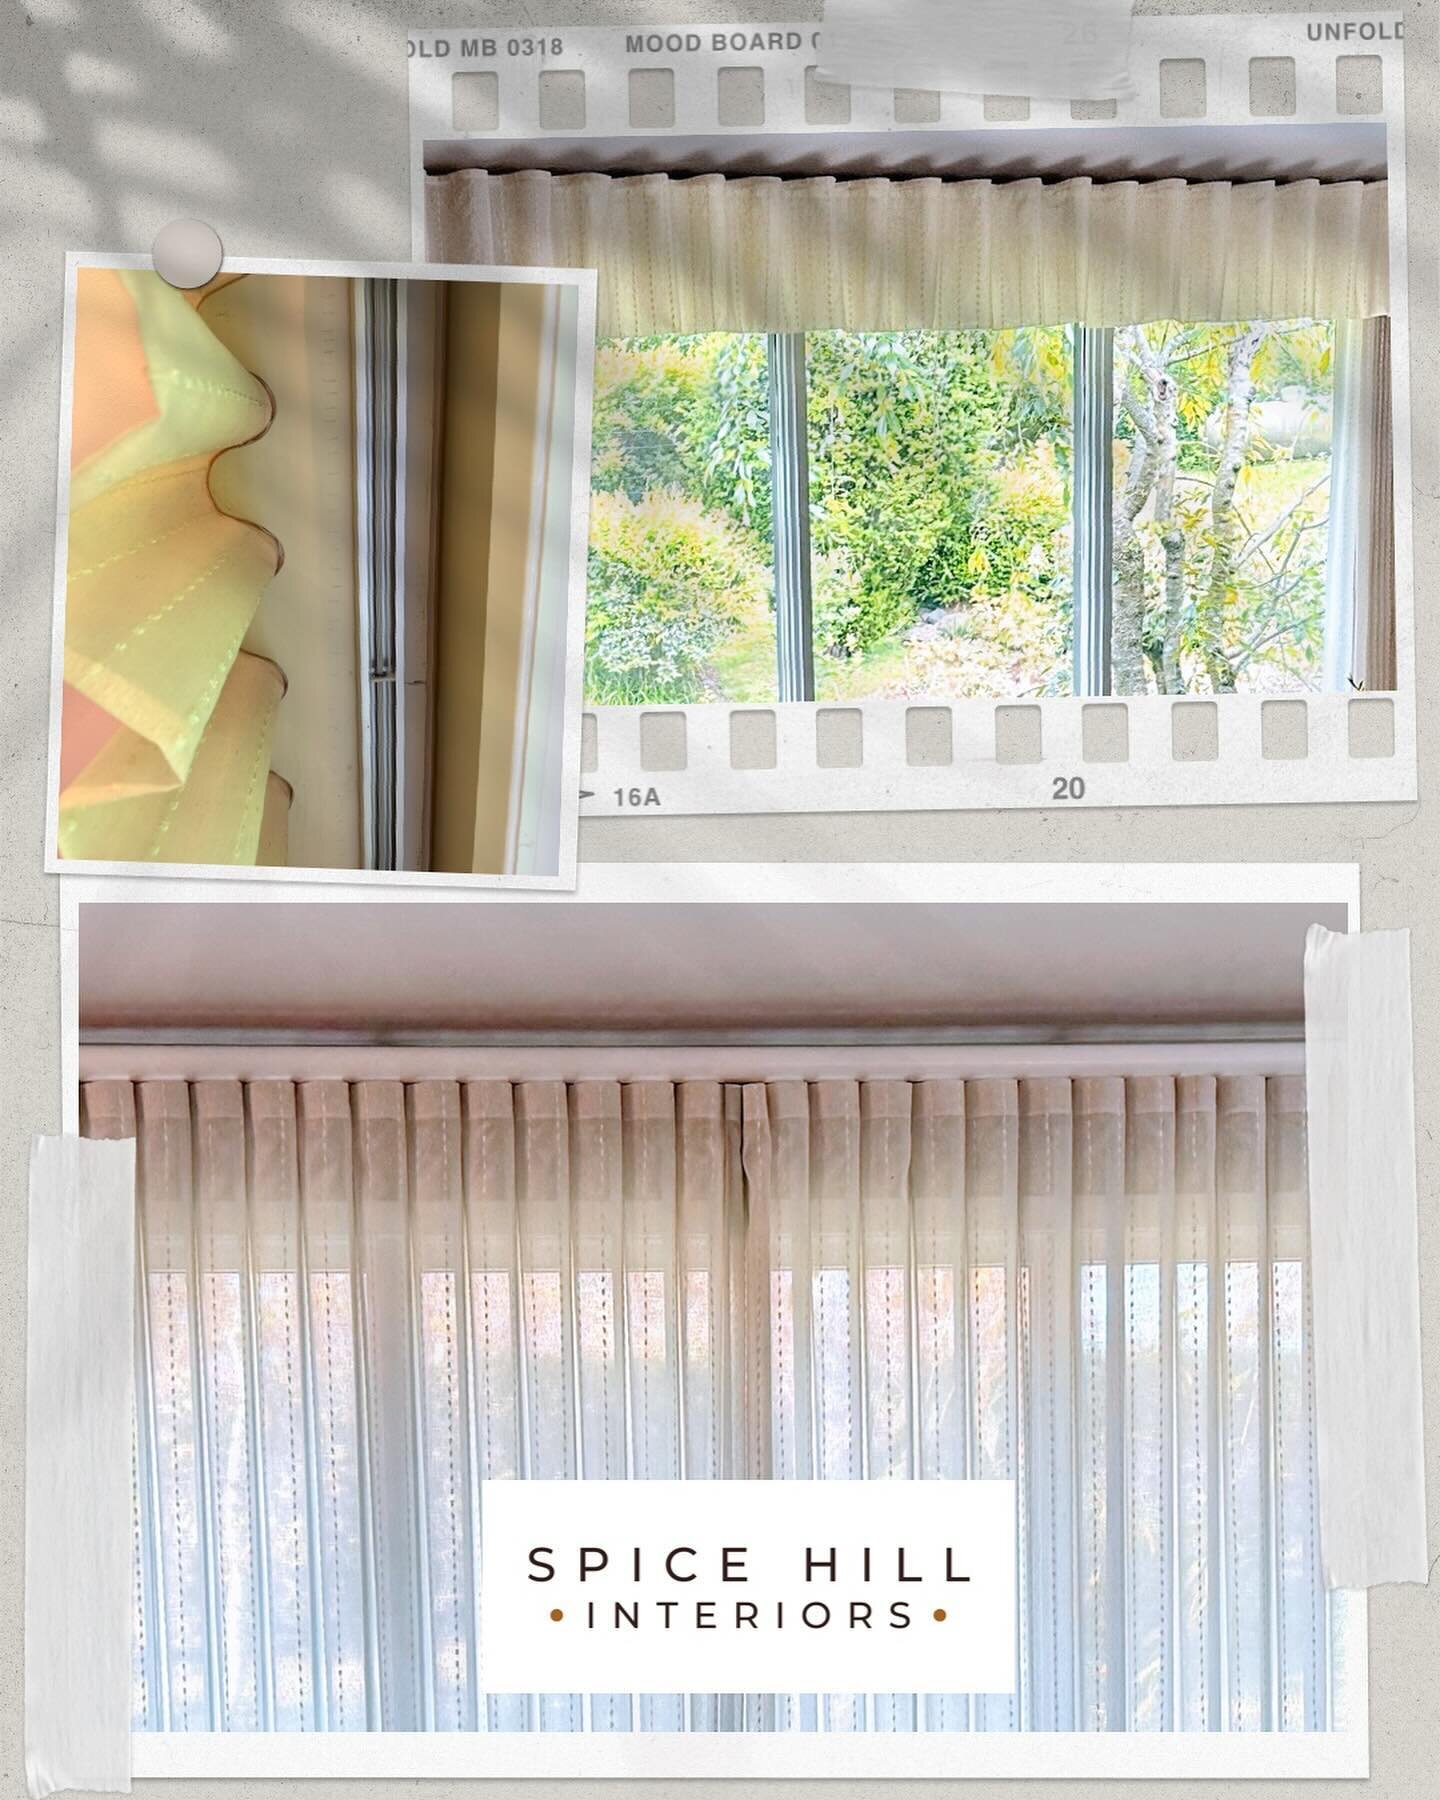 OPERATION SIMPLIFY!
Sometimes a room update doesn&rsquo;t mean a total redo! Removed those frilly valances from discontinued Hunter Douglas PermAlign Sheers and replaced them with custom wood track covers for a cleaner look.
#windowtreatmentsolutions